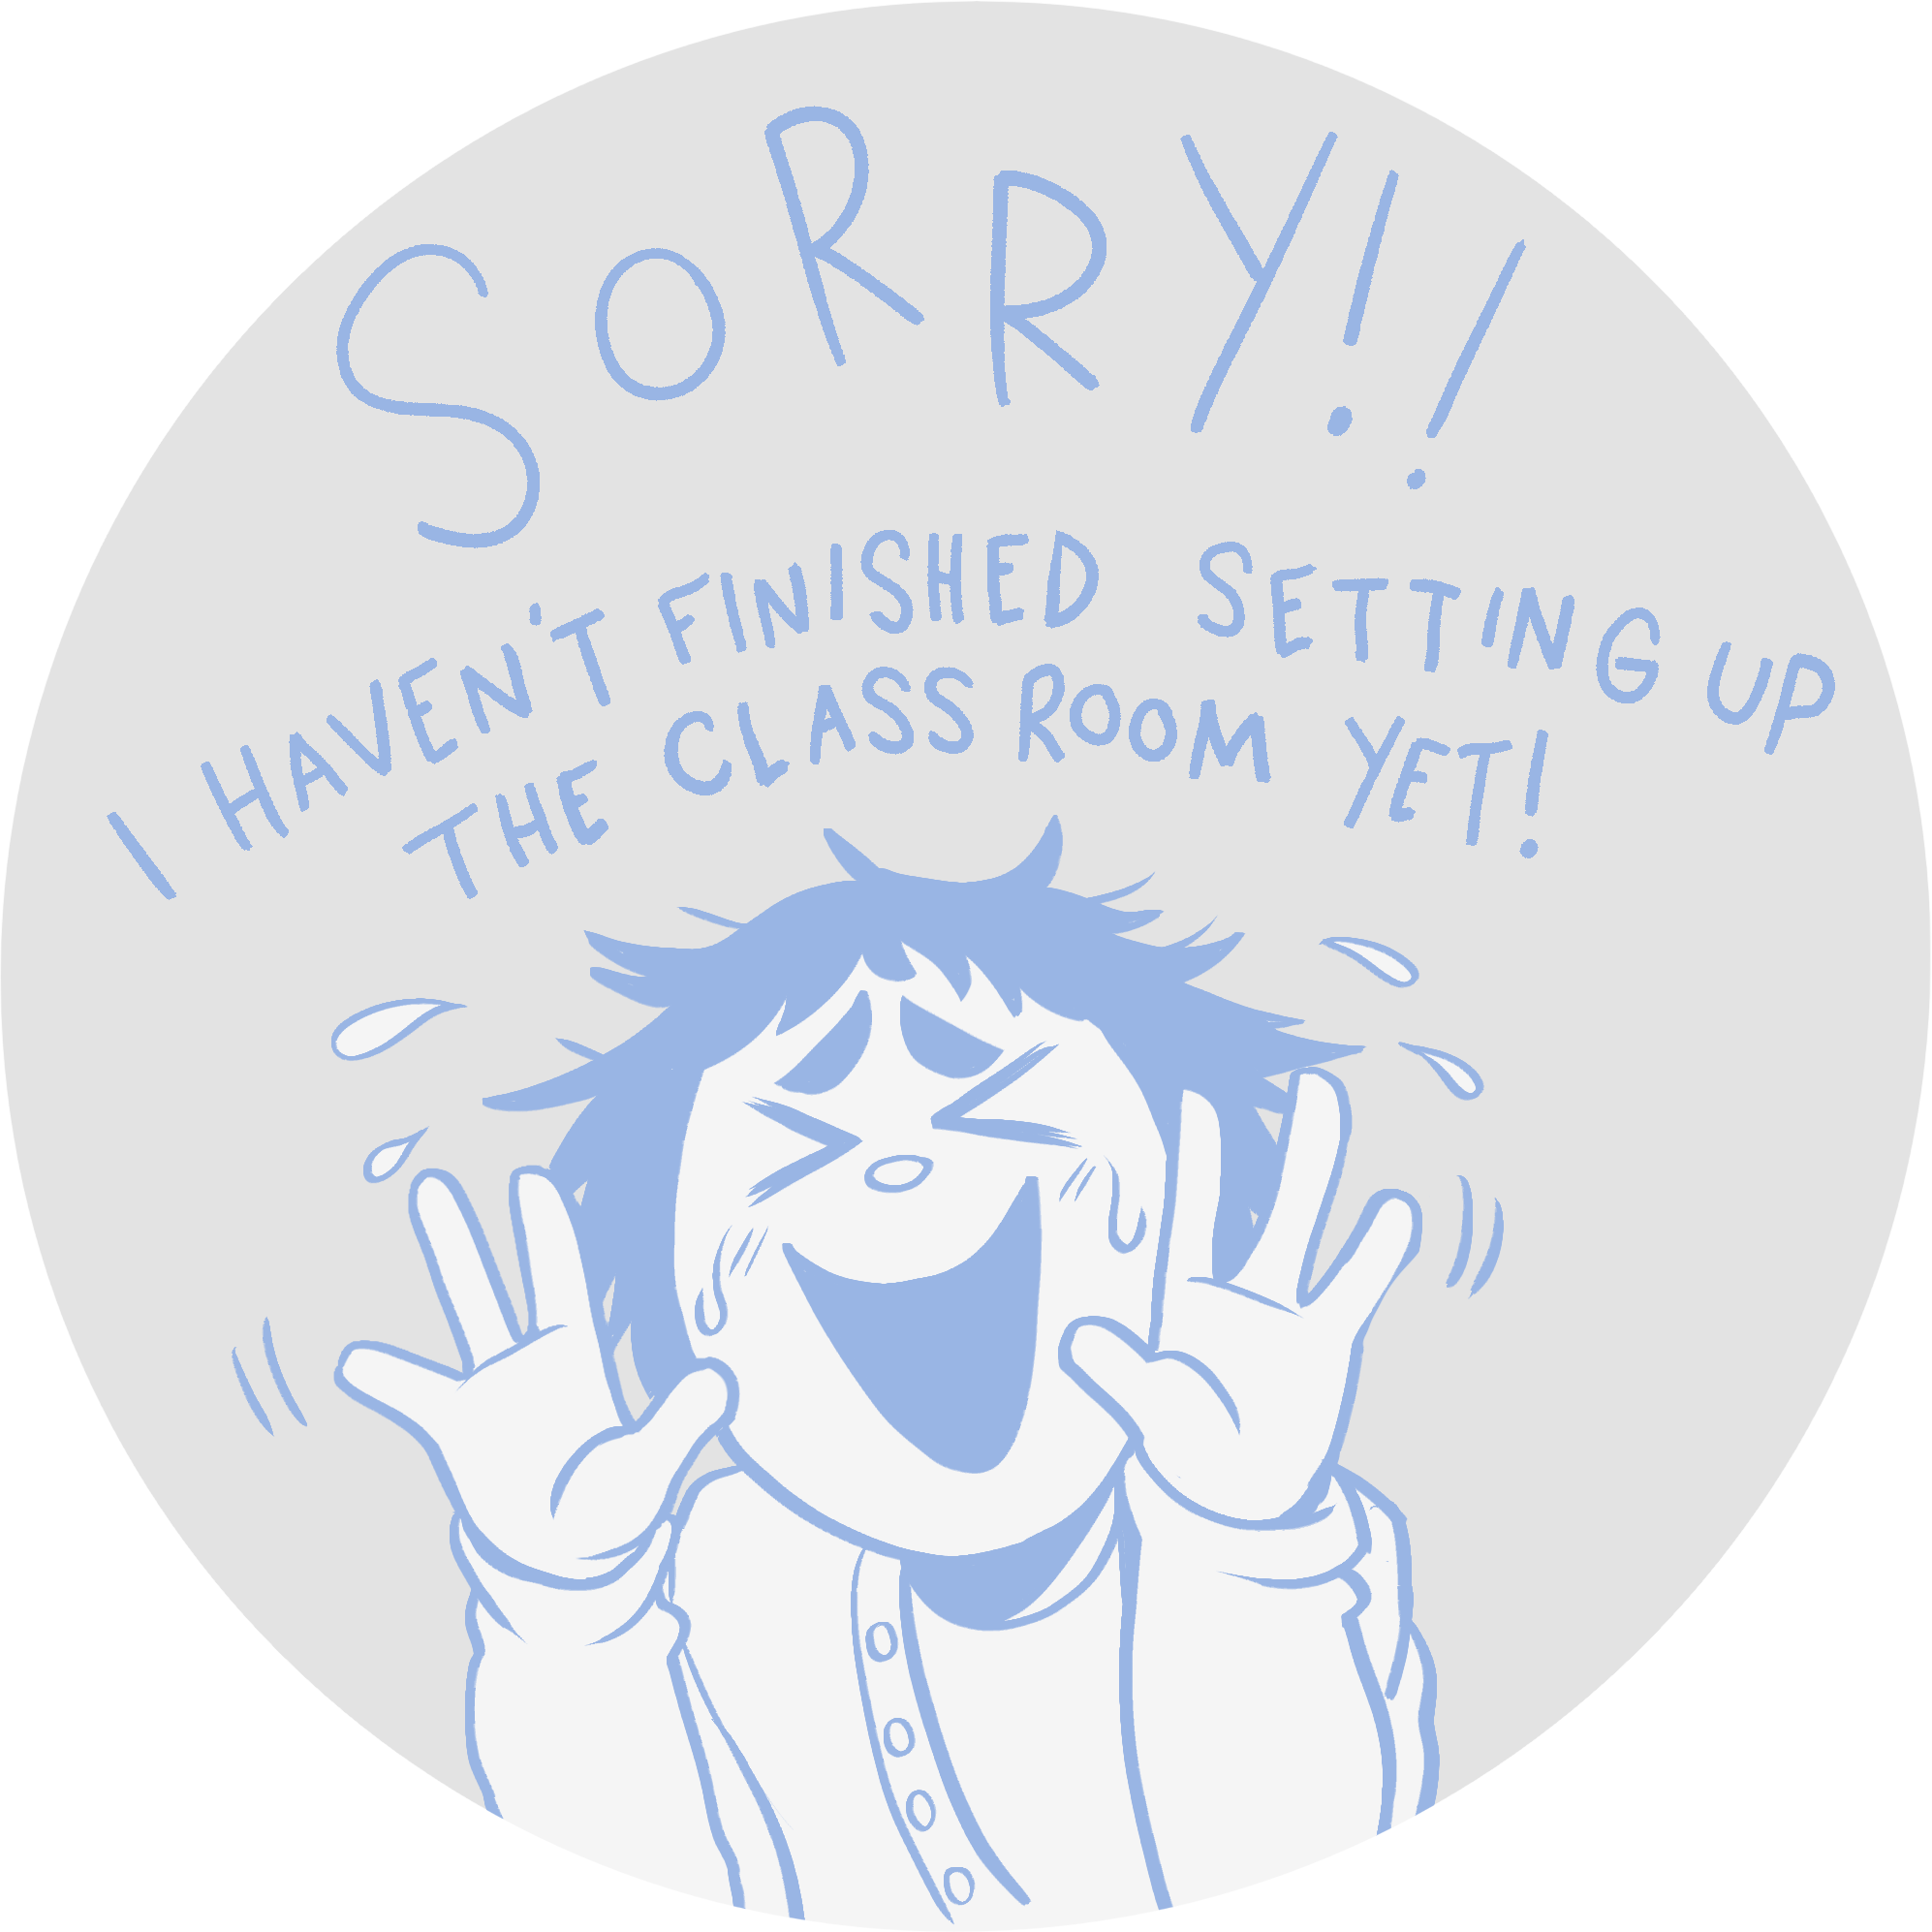 Image of Miss White waving her hands, saying Sorry! This comic isn't ready yet!